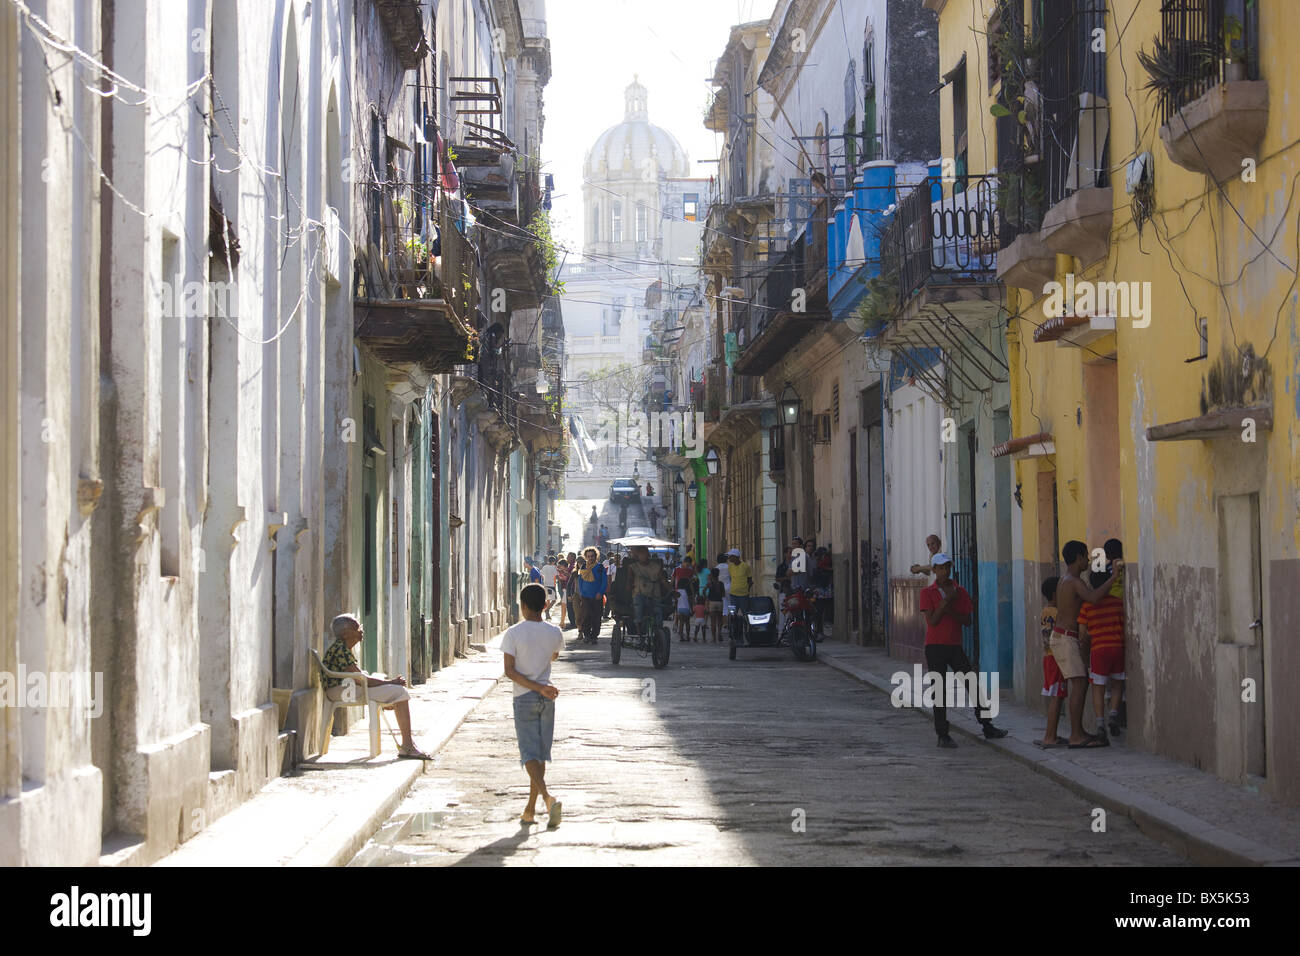 View along a typical residential street in Havana, Cuba Stock Photo